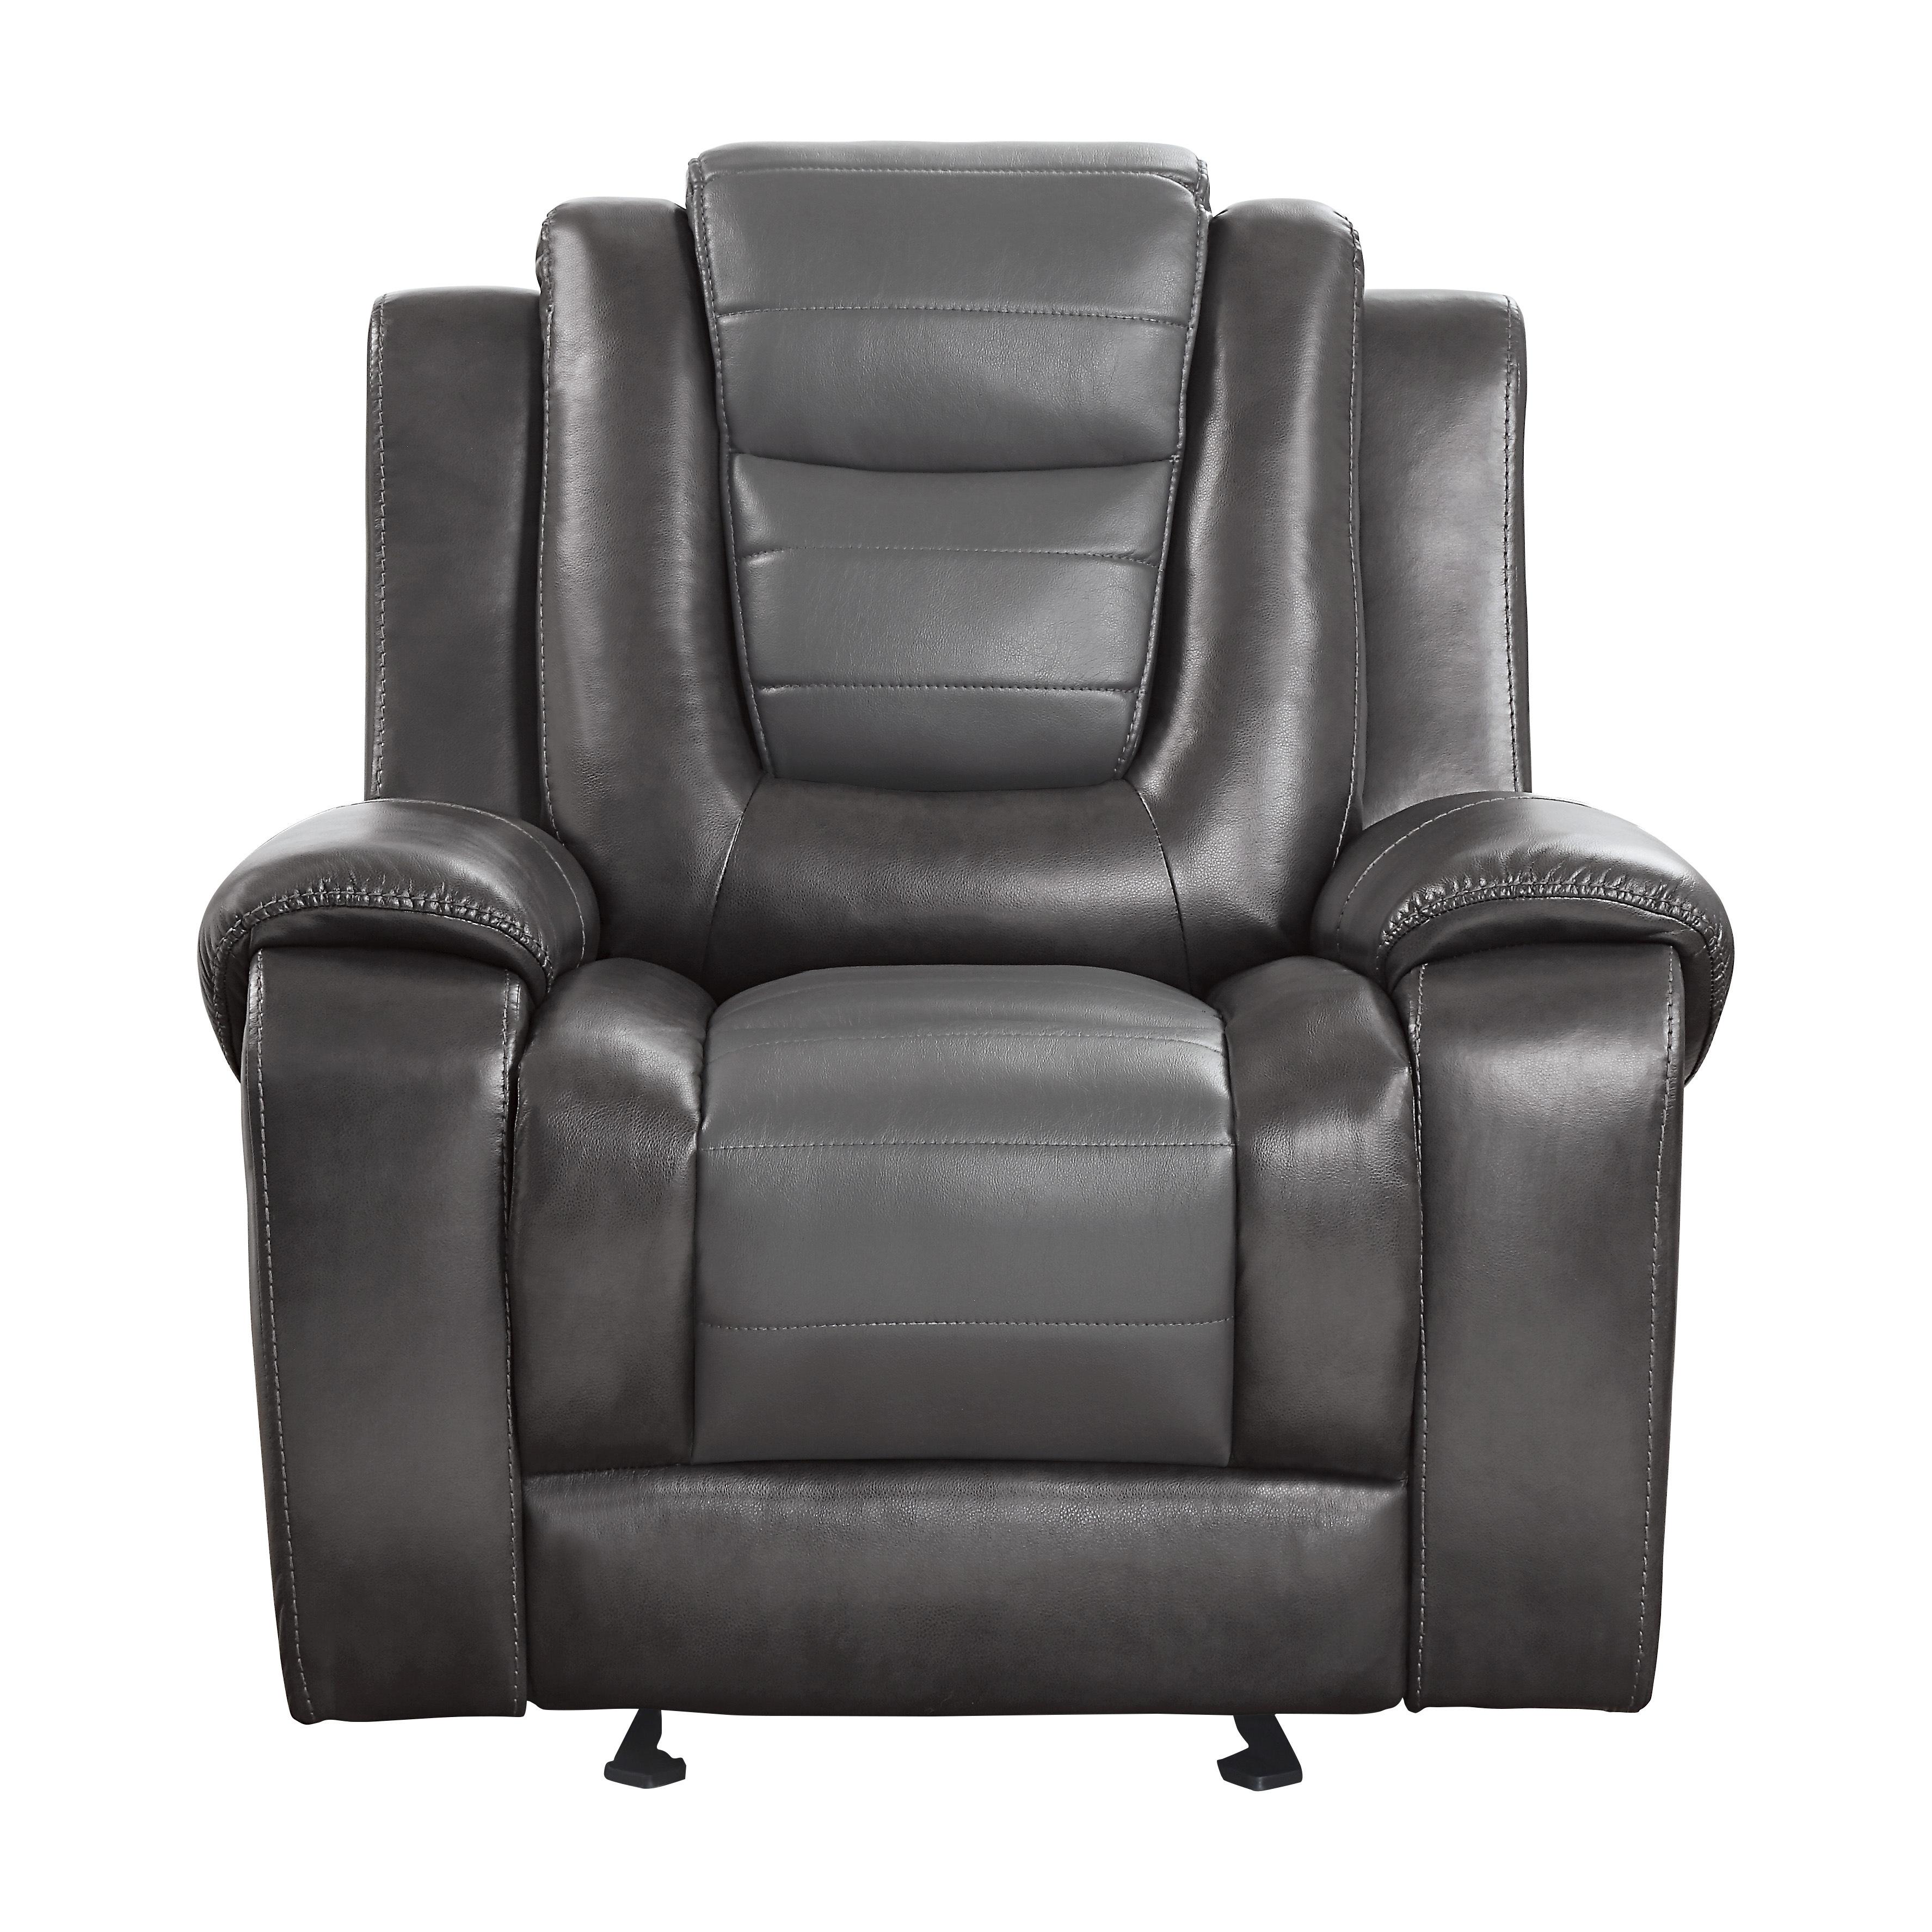 

    
Transitional Dark Gray & Light Gray Faux Leather Reclining Chair Homelegance 9470BR-1 Briscoe
